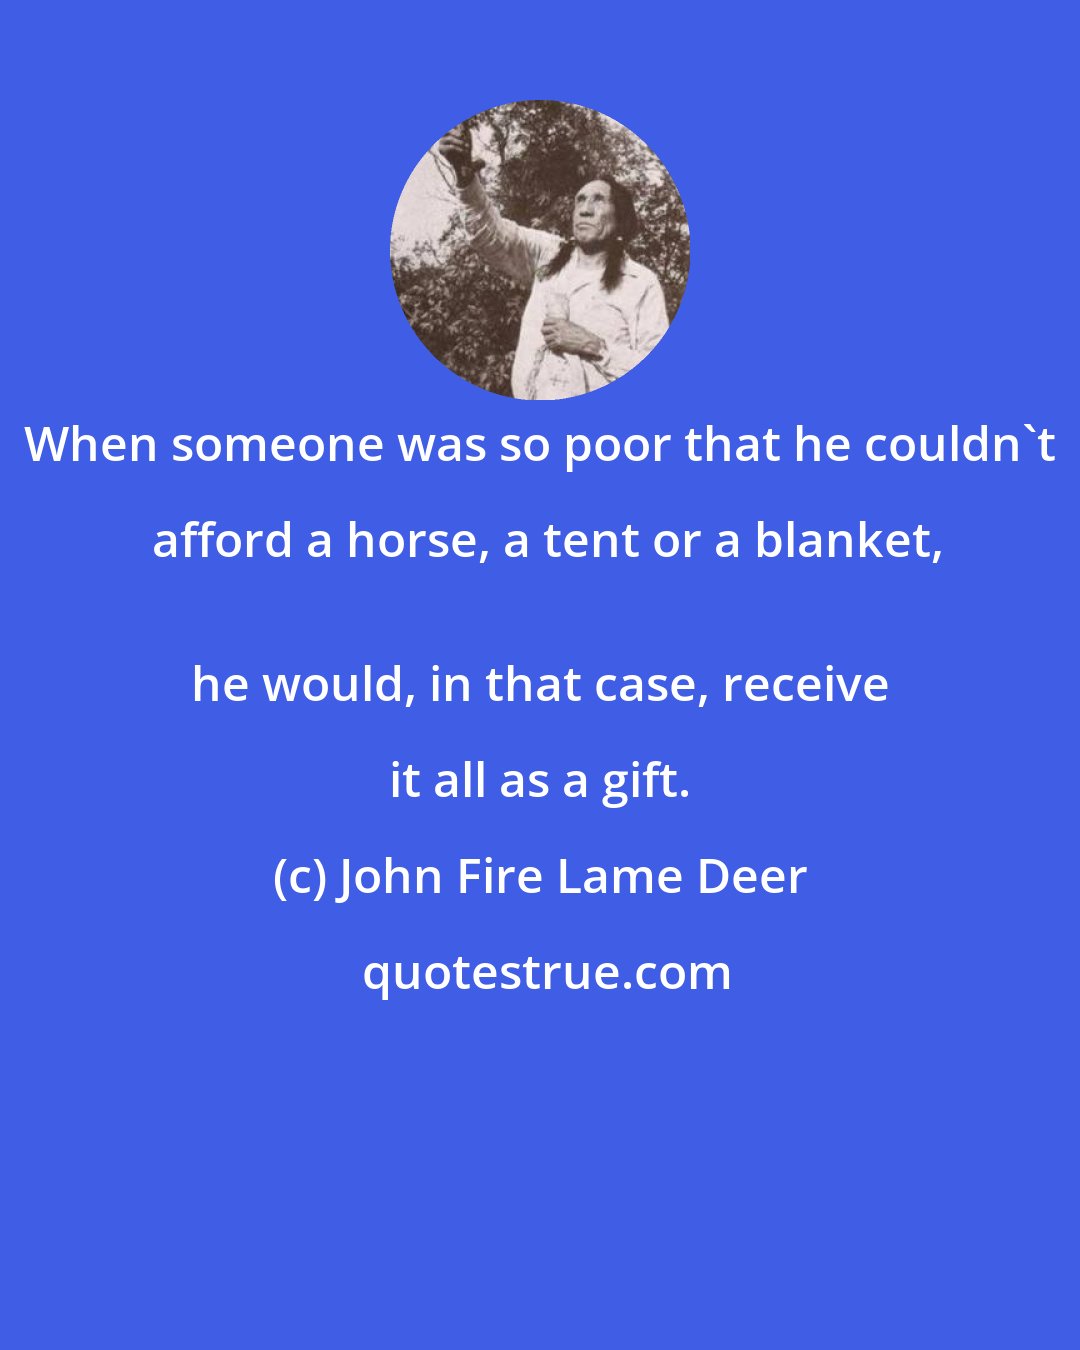 John Fire Lame Deer: When someone was so poor that he couldn't afford a horse, a tent or a blanket,
 he would, in that case, receive it all as a gift.